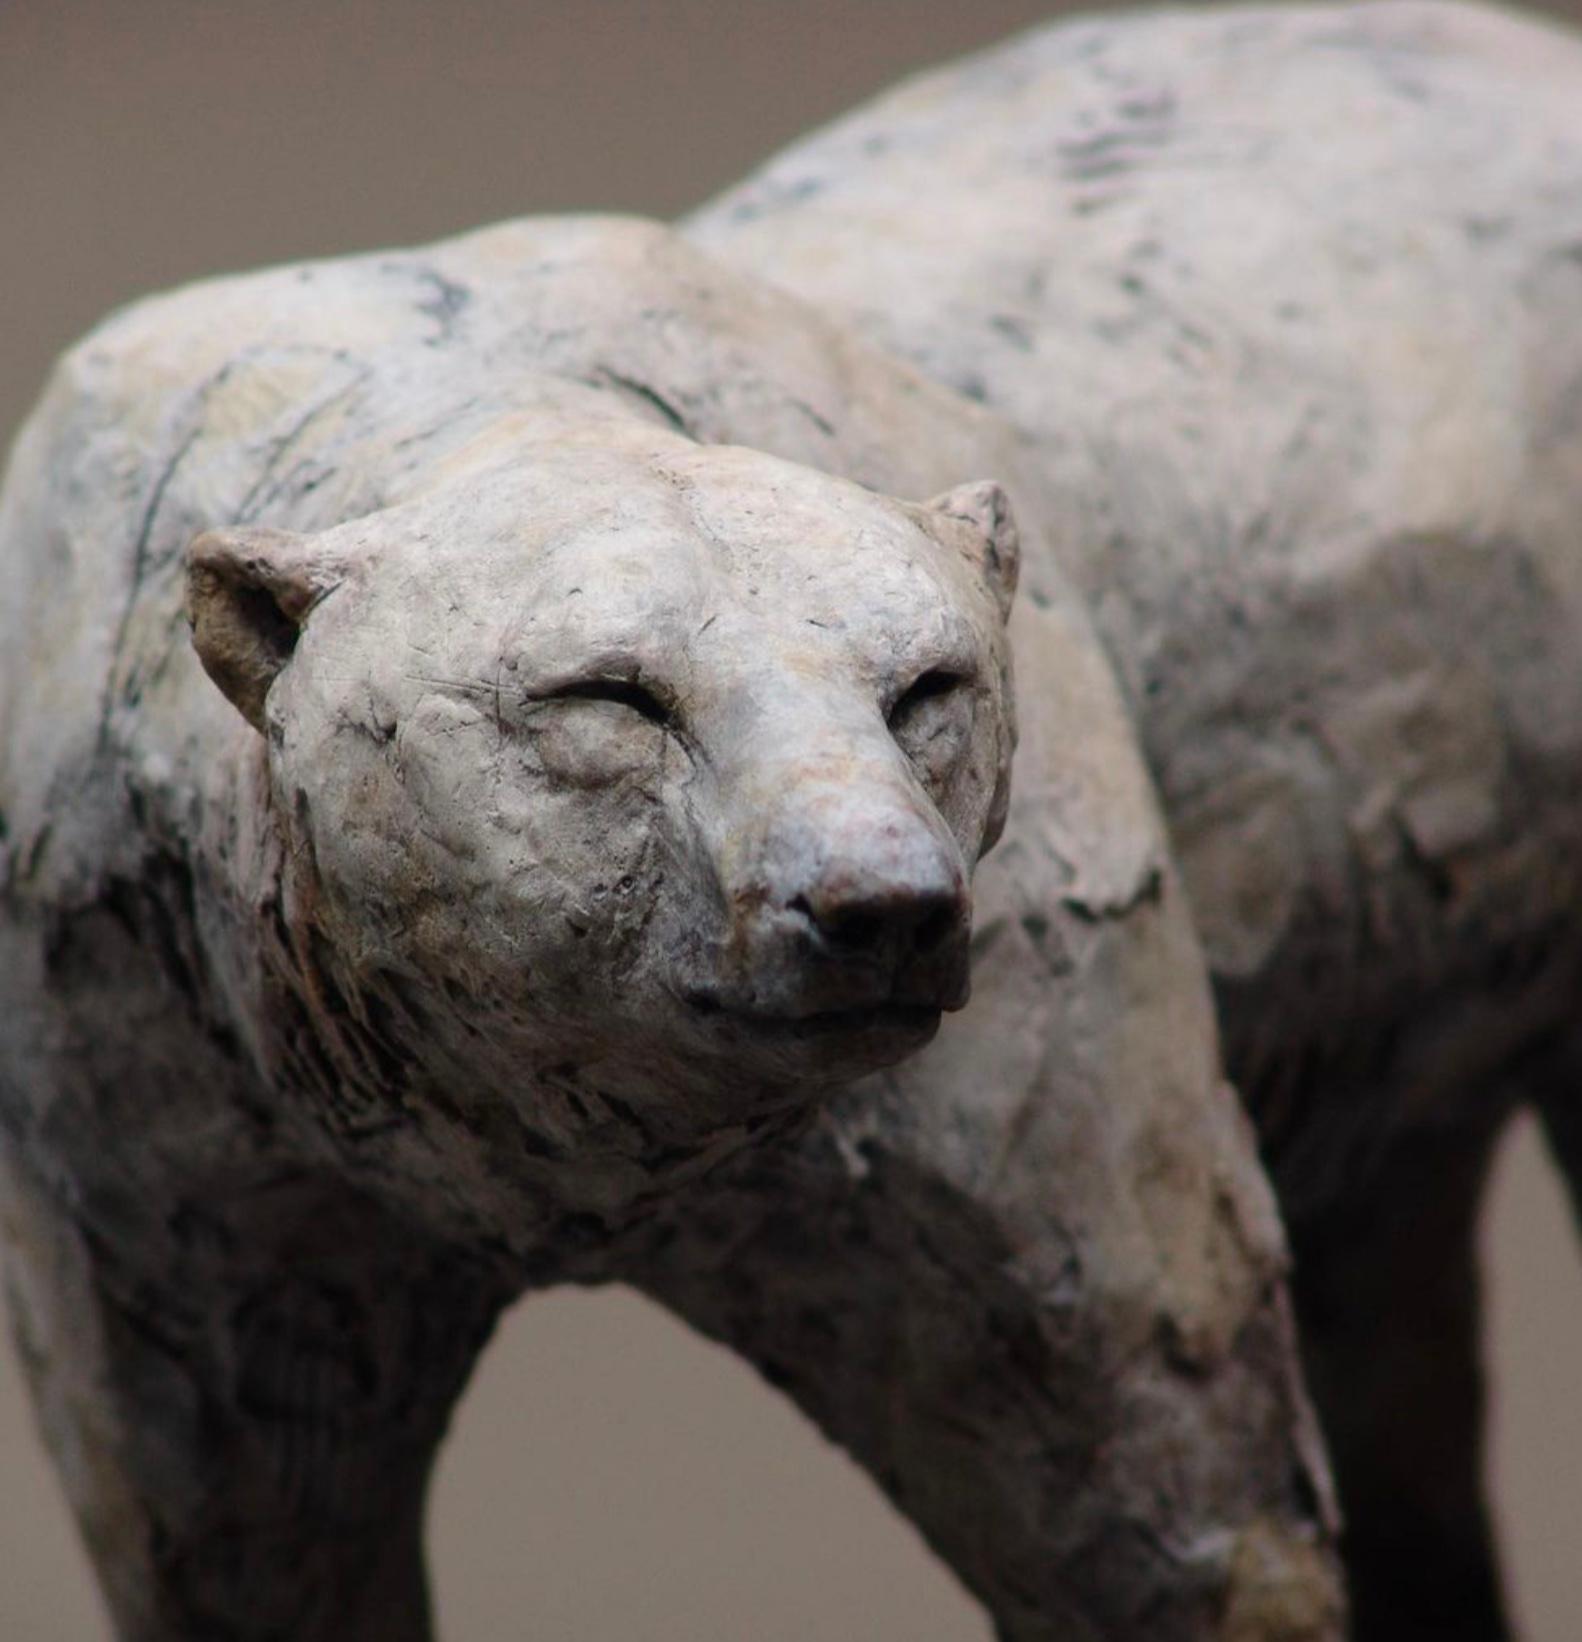 Nichola Theakston (1967) has established herself as one of the UK’s foremost contemporary sculptors working within the animal genre. 

With the ''Arctic Bear'' Nichola shows how exquisite she can capture the feelings and expressions in an animal.